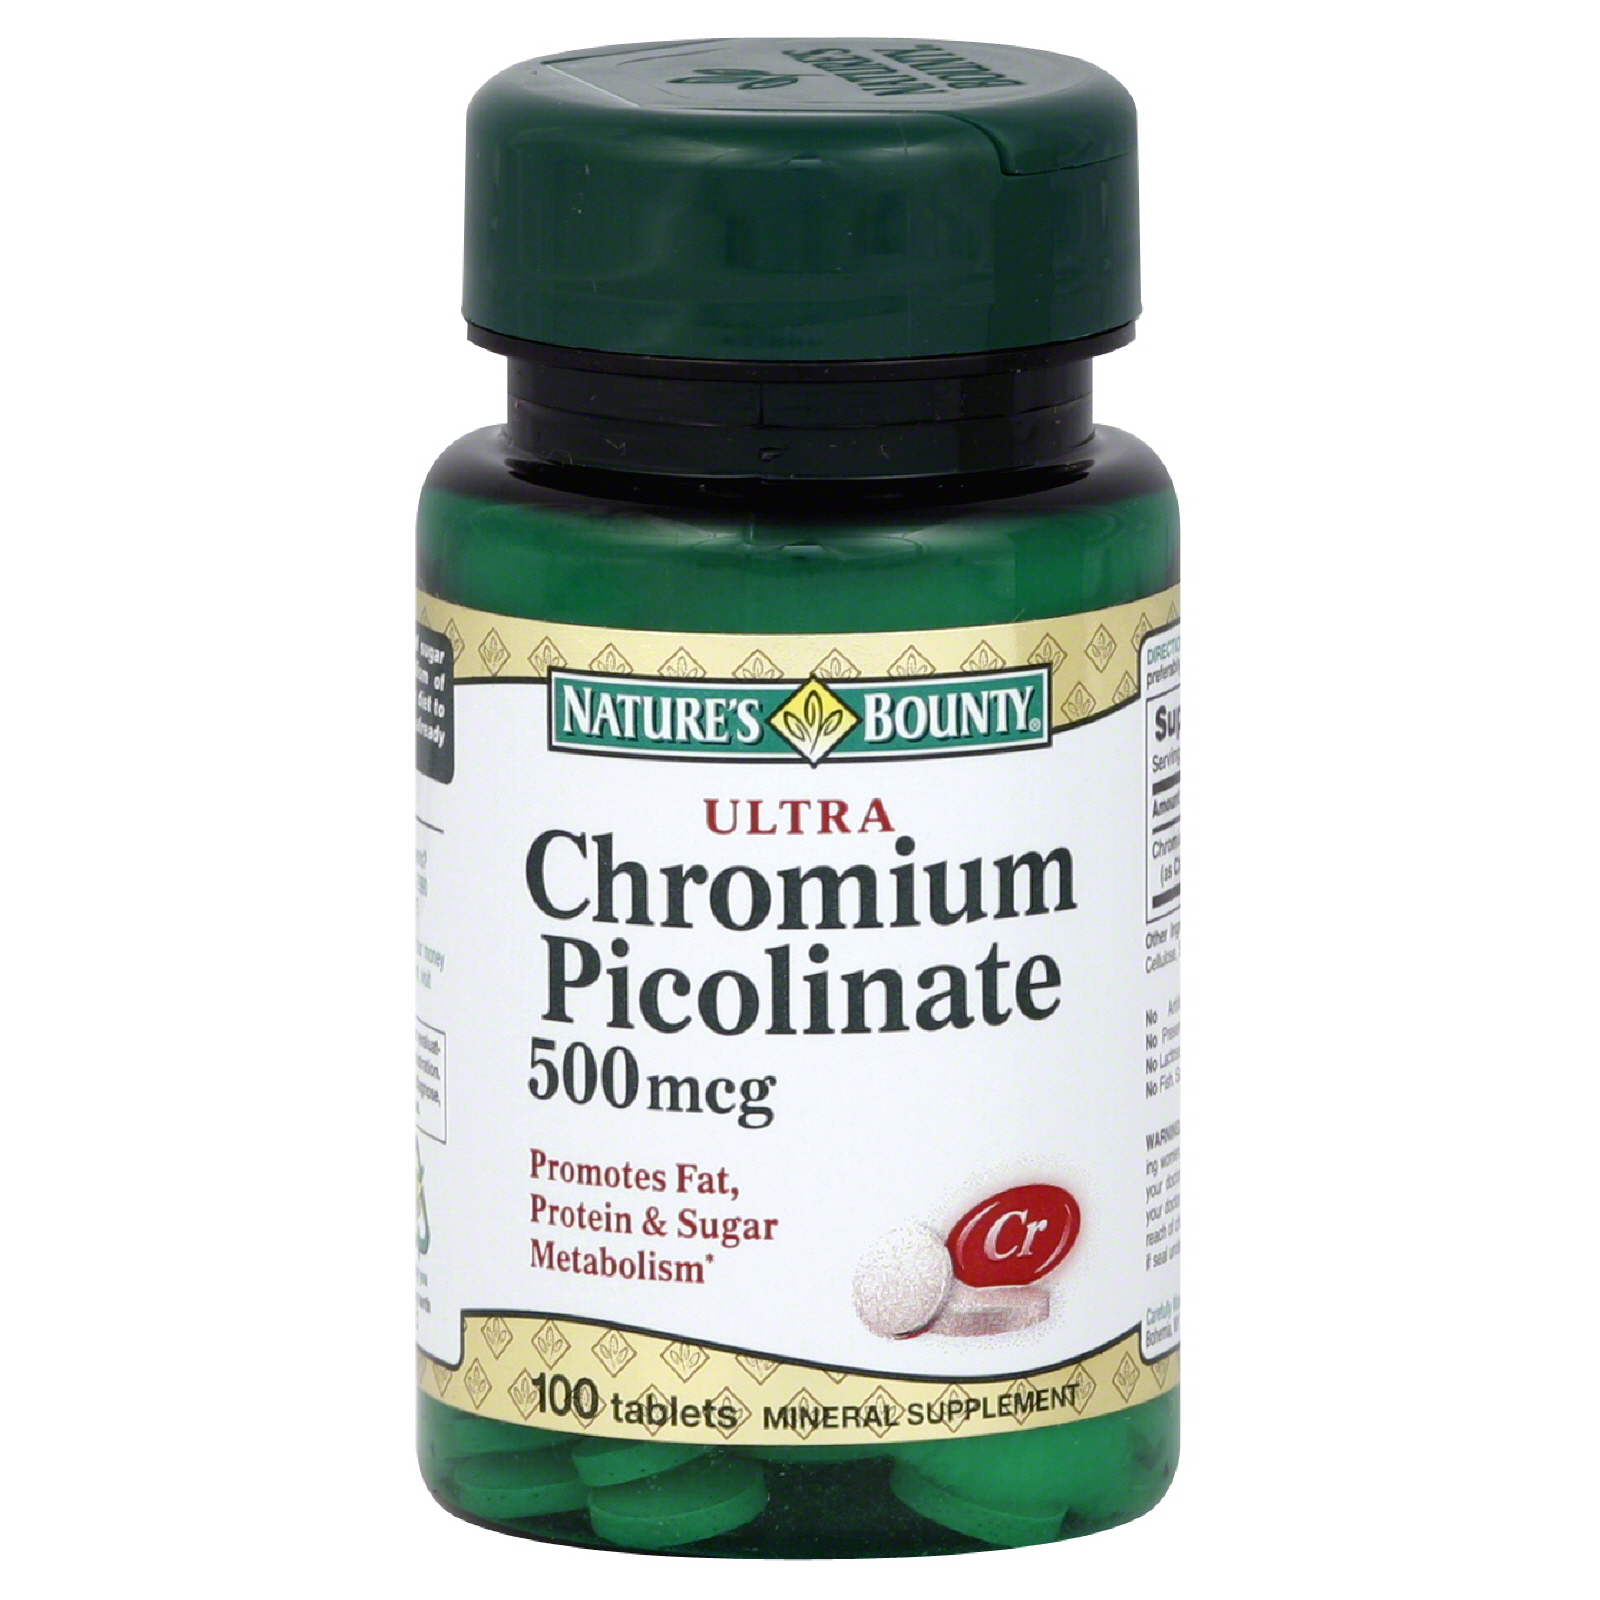 Nature's Bounty Chromium Picolinate, Ultra, 500 mcg, Tablets, 100 tablets